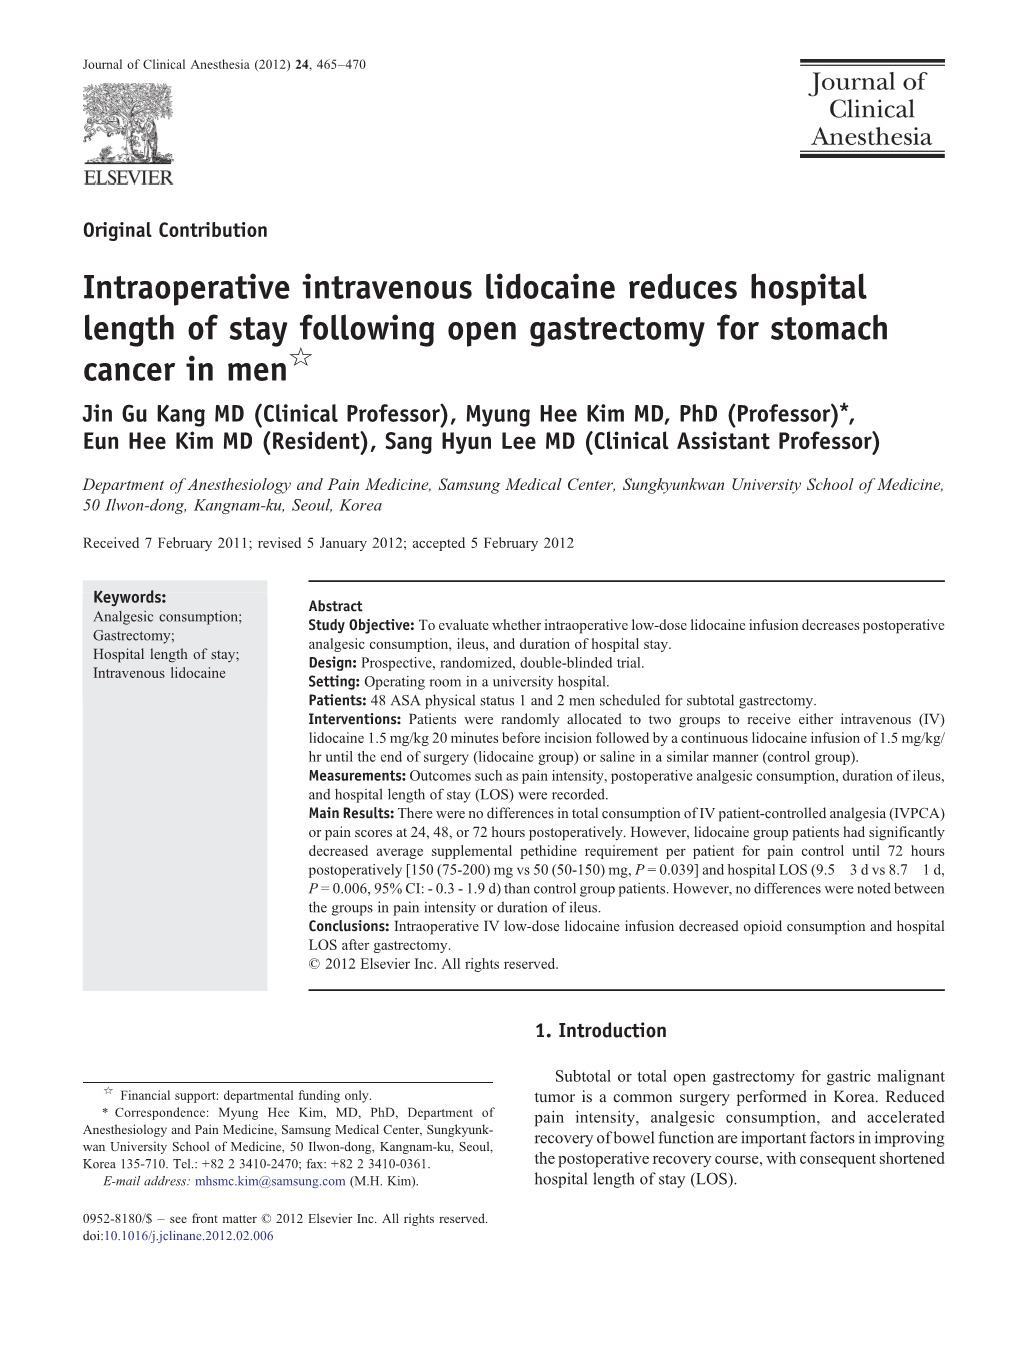 Intraoperative Intravenous Lidocaine Reduces Hospital Length of Stay